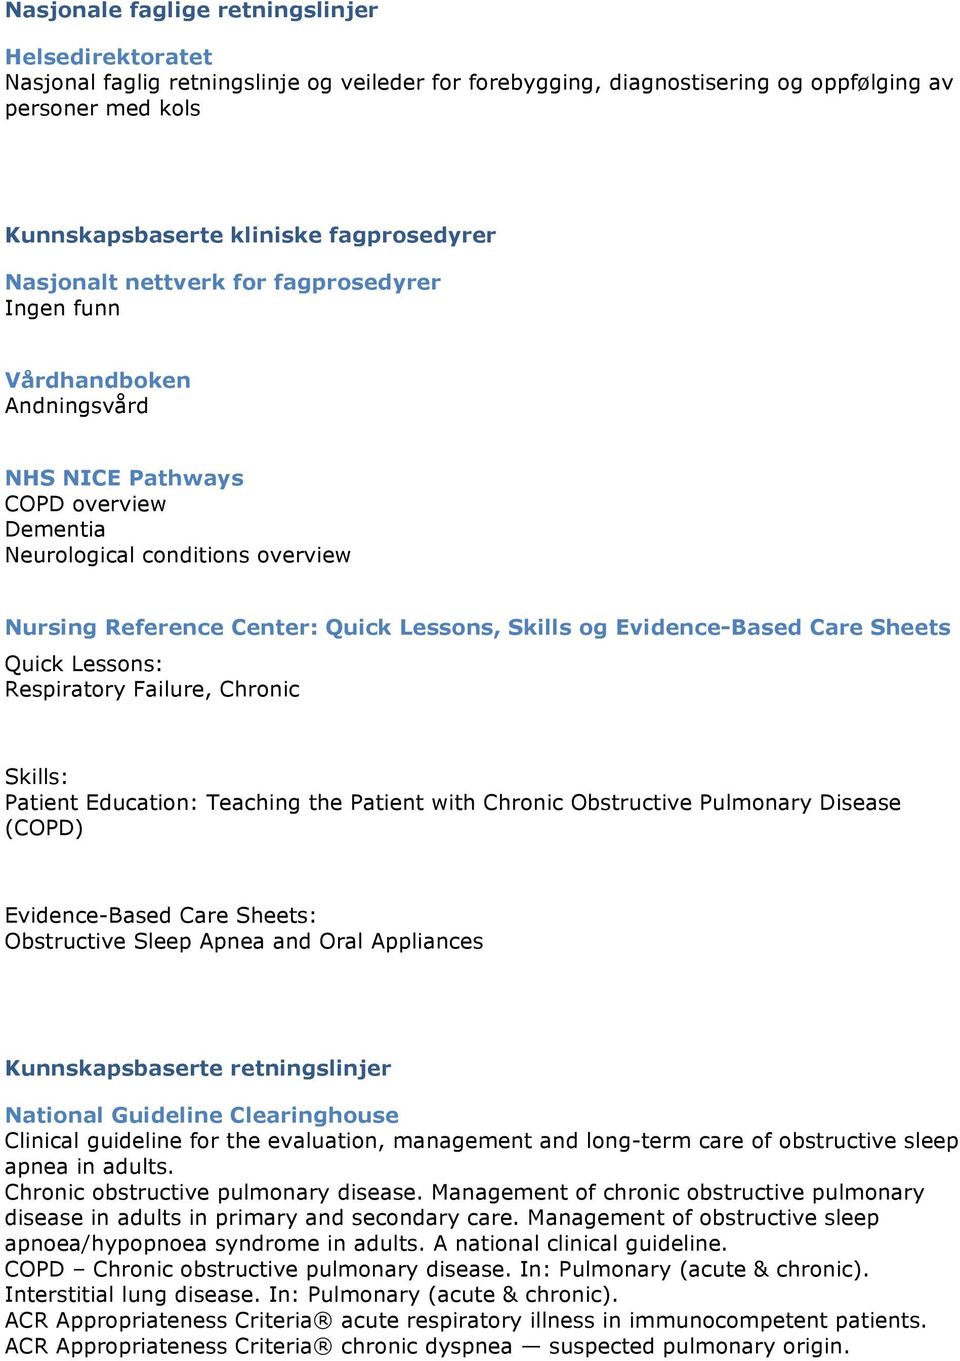 og Evidence-Based Care Sheets Quick Lessons: Respiratory Failure, Chronic Skills: Patient Education: Teaching the Patient with Chronic Obstructive Pulmonary Disease (COPD) Evidence-Based Care Sheets: